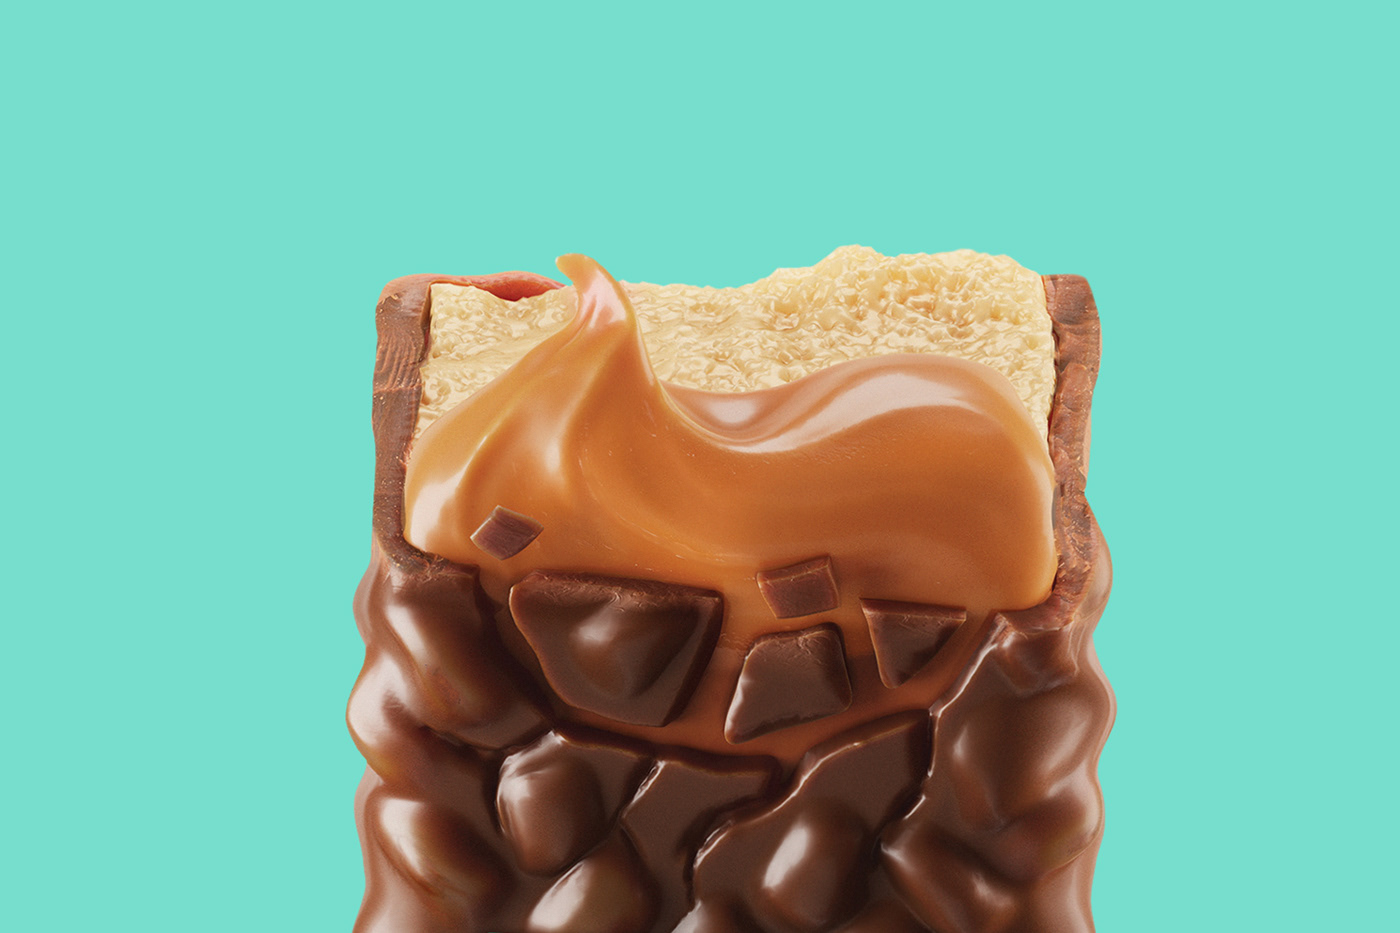 3D illustrations of protein bars. Zbrush to create the shape, Cinema4D Redshift render.